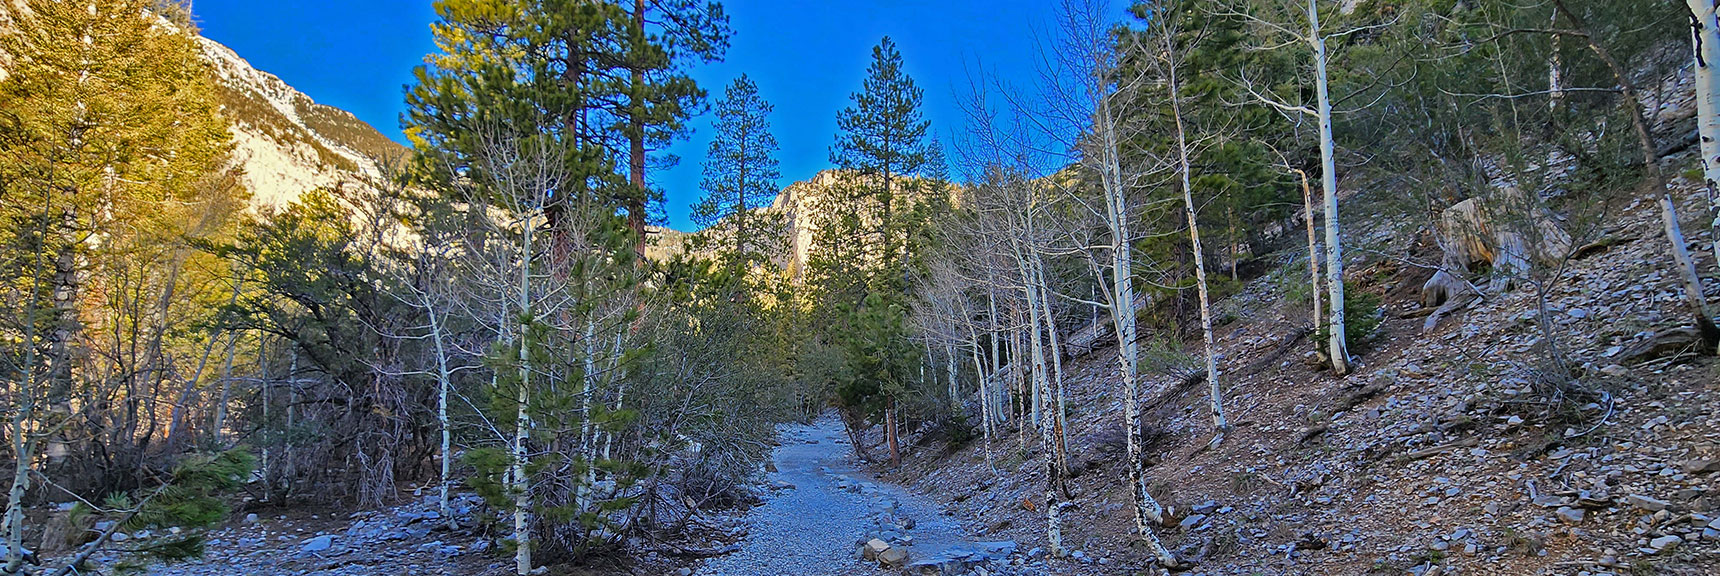 Begin Gradual Ascent on Wide Trail Through Beautiful Canyon | Mary Jane Falls | Mt. Charleston Wilderness | Spring Mountains, Nevada